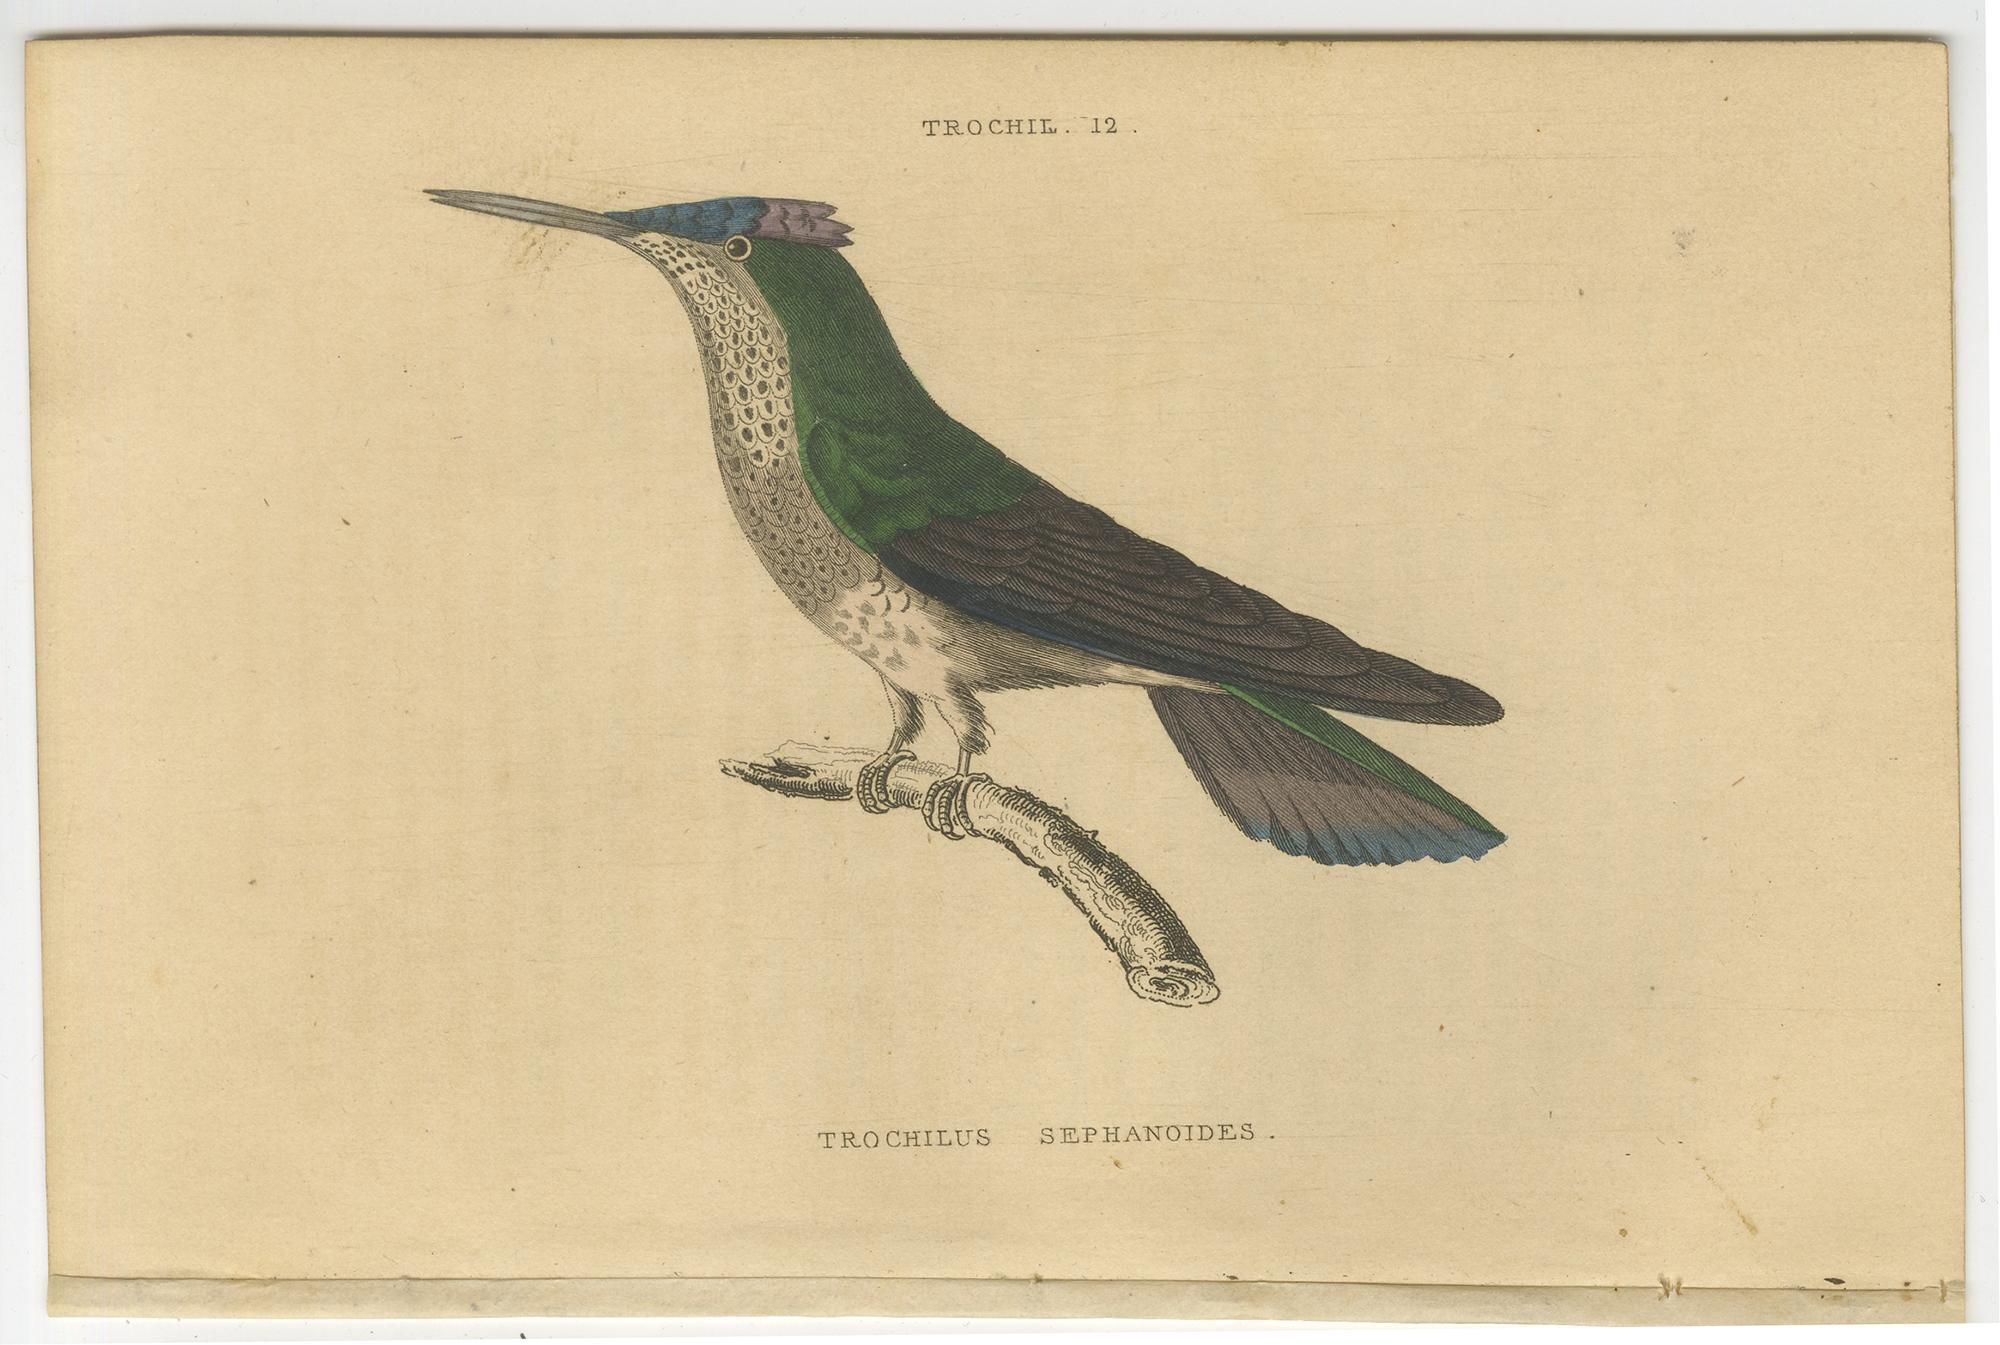 Set of six antique bird prints. It shows the saw-billed hermit, (Ramphodon Naevius), violet-crowned hummingbird (Trochilus Sephanoides), double-crested hummingbird (Trochilus Cornutus), evening hummingbird (Trochilus Vesper) and the half-tailed